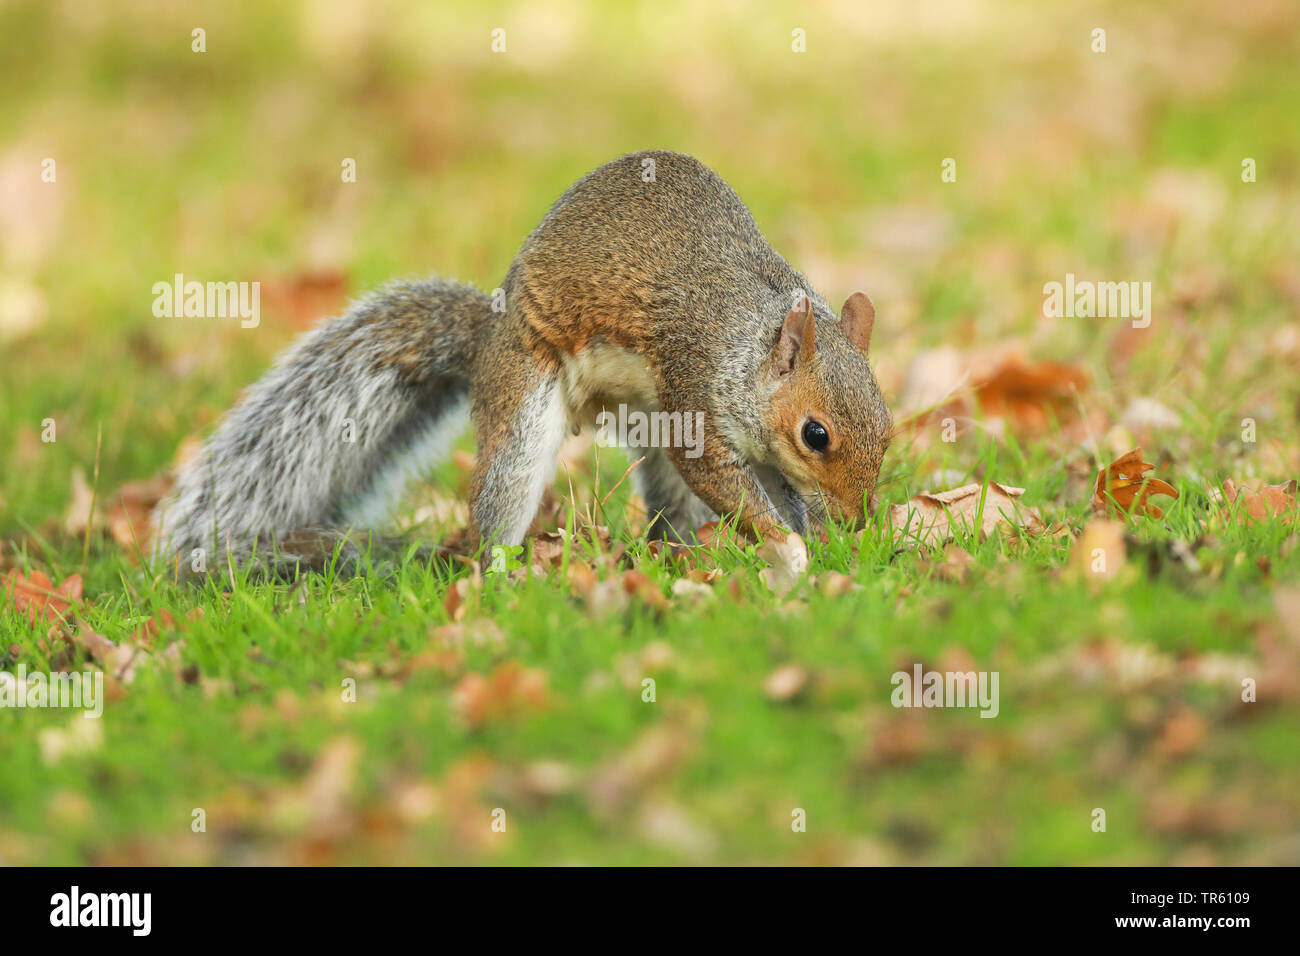 Eastern gray squirrel, Grey squirrel (Sciurus carolinensis), storing up winter food in a meadow, side view, United Kingdom, England, Richmond Park Stock Photo